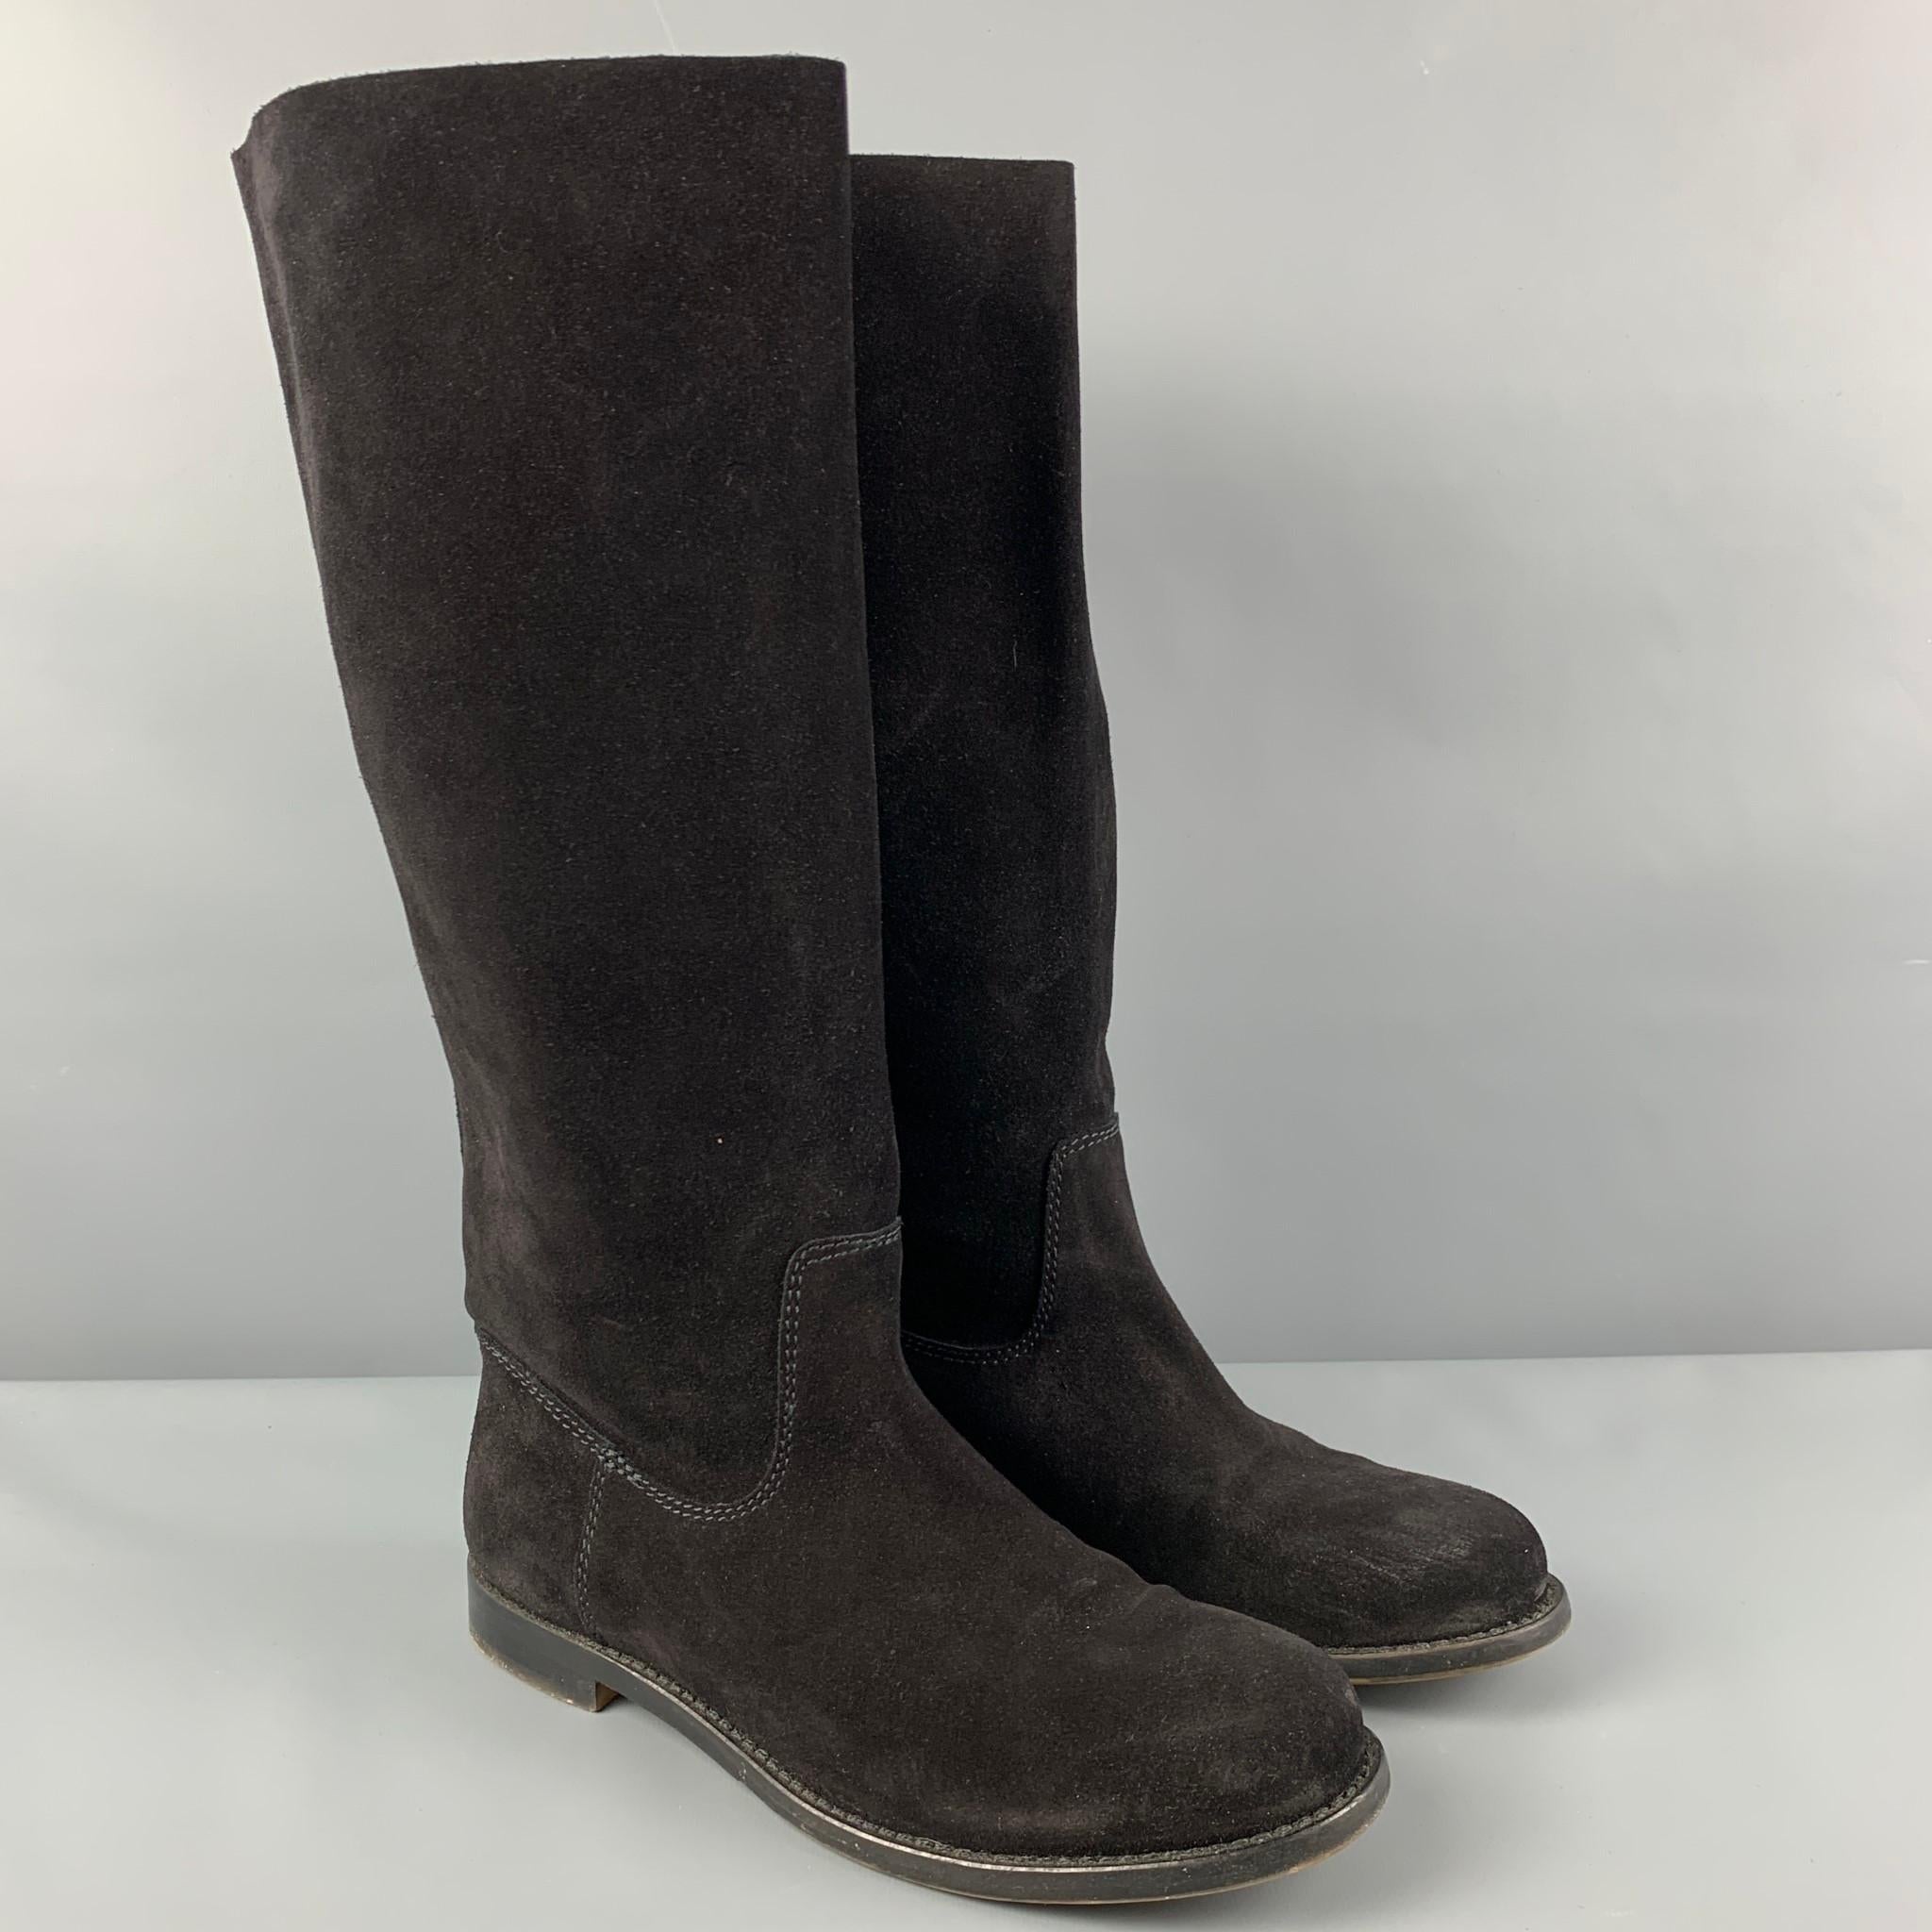 VERA WANG 'Kristen' boots comes in a black suede featuring a riding style, slip on, and a low heel. Includes box. 

Very Good Pre-Owned Condition. Light wear.
Marked: 8.5

Measurements:

Length: 10.5 in.
Width: 3.75 in.
Height: 15 in. 